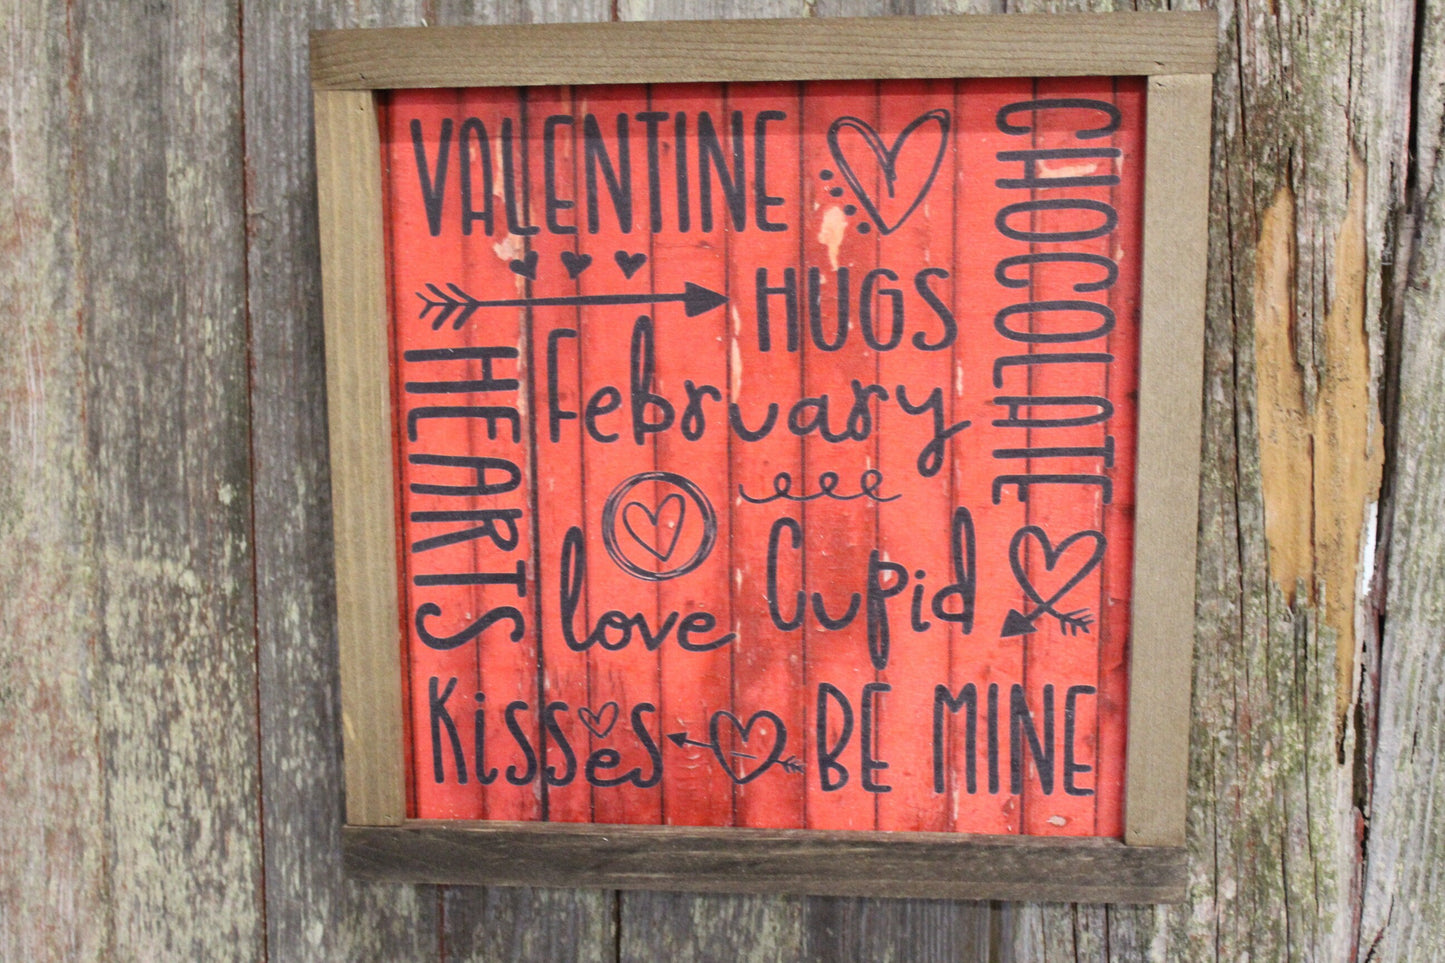 Valentines Wood Sign XOXO Text February Kiss Hug Phrases Heart Sweetest Day Valentines Day Red Shiplap Print Art Farmhouse Primitive Rustic